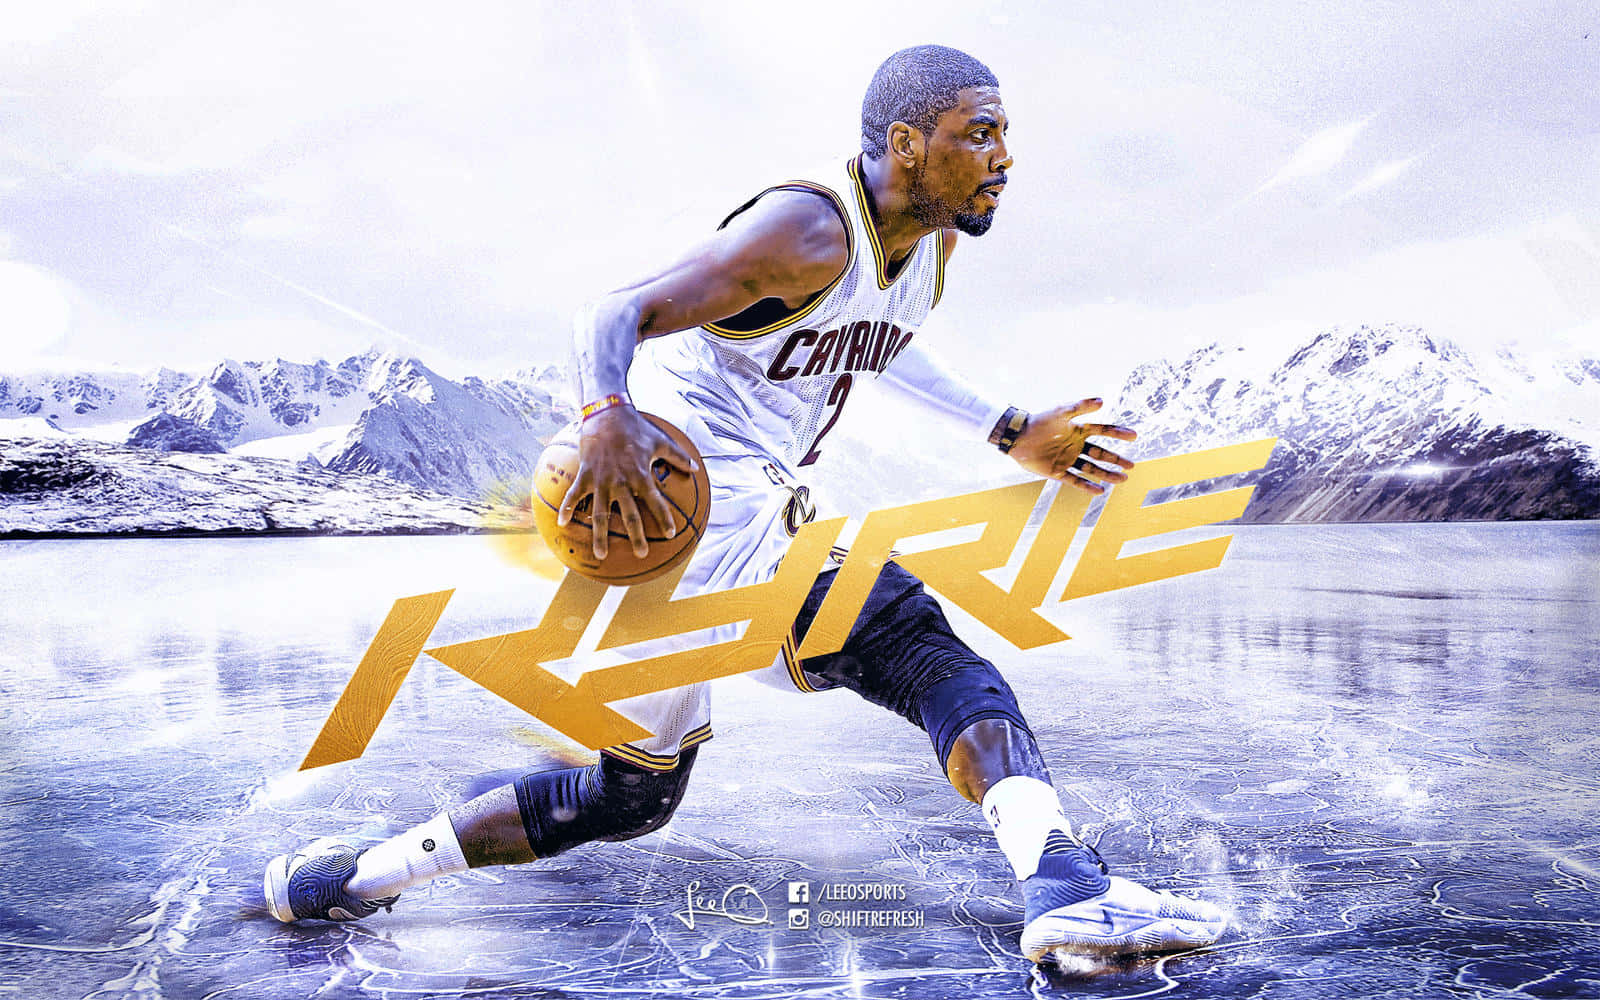 Kyrie Irving looking cool and confident on the court. Wallpaper